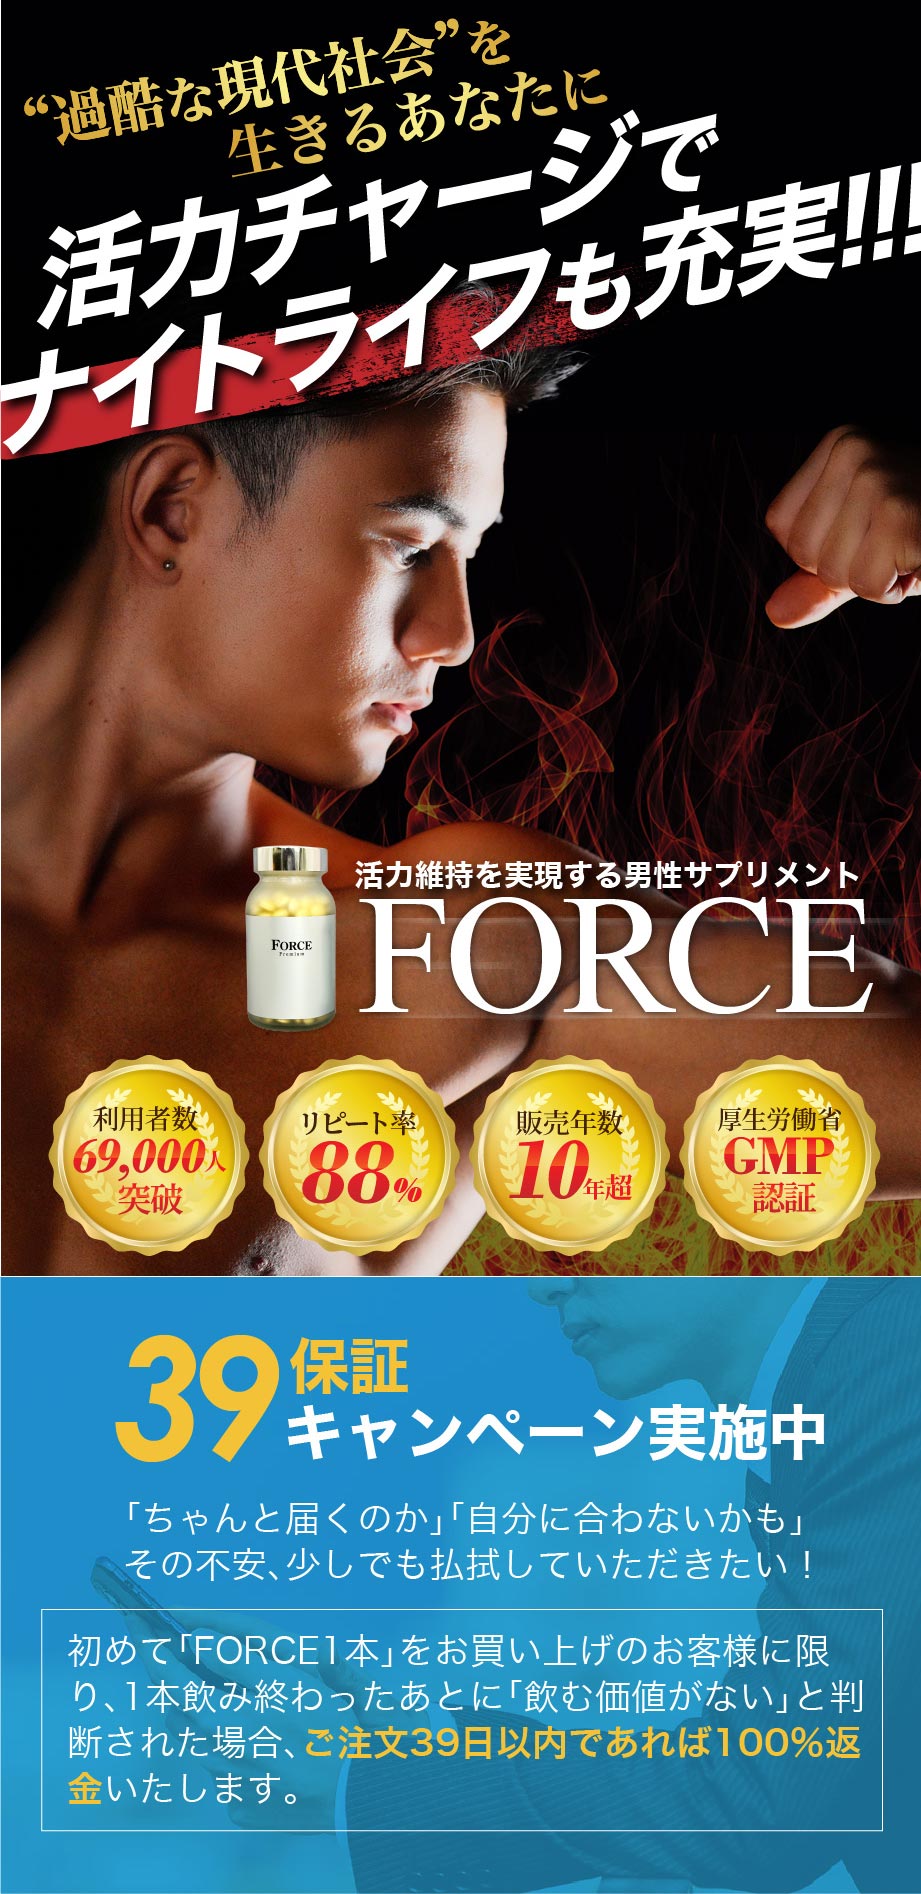 FORCE商品のご案内01